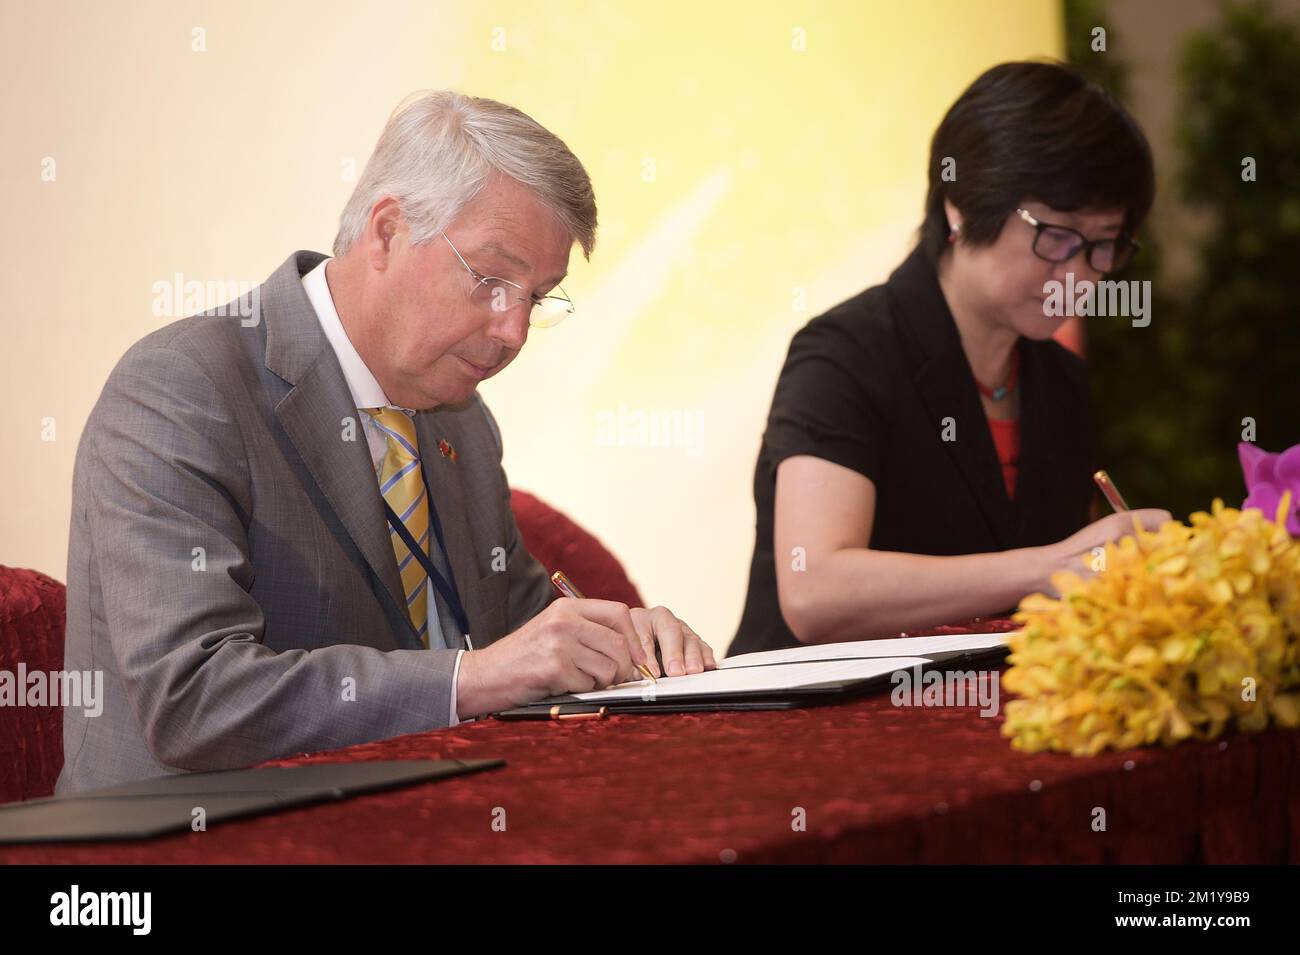 20150626 - SUZHOU, CHINA: BioWin President Jean-Pierre Delwart and Culling Wu, Guangzhou Biotechnology Center pictured during a signing ceremony in Shenzhen on the seventh day of a royal visit to China, Friday 26 June 2015, in China. BELGA PHOTO YORICK JANSENS Stock Photo